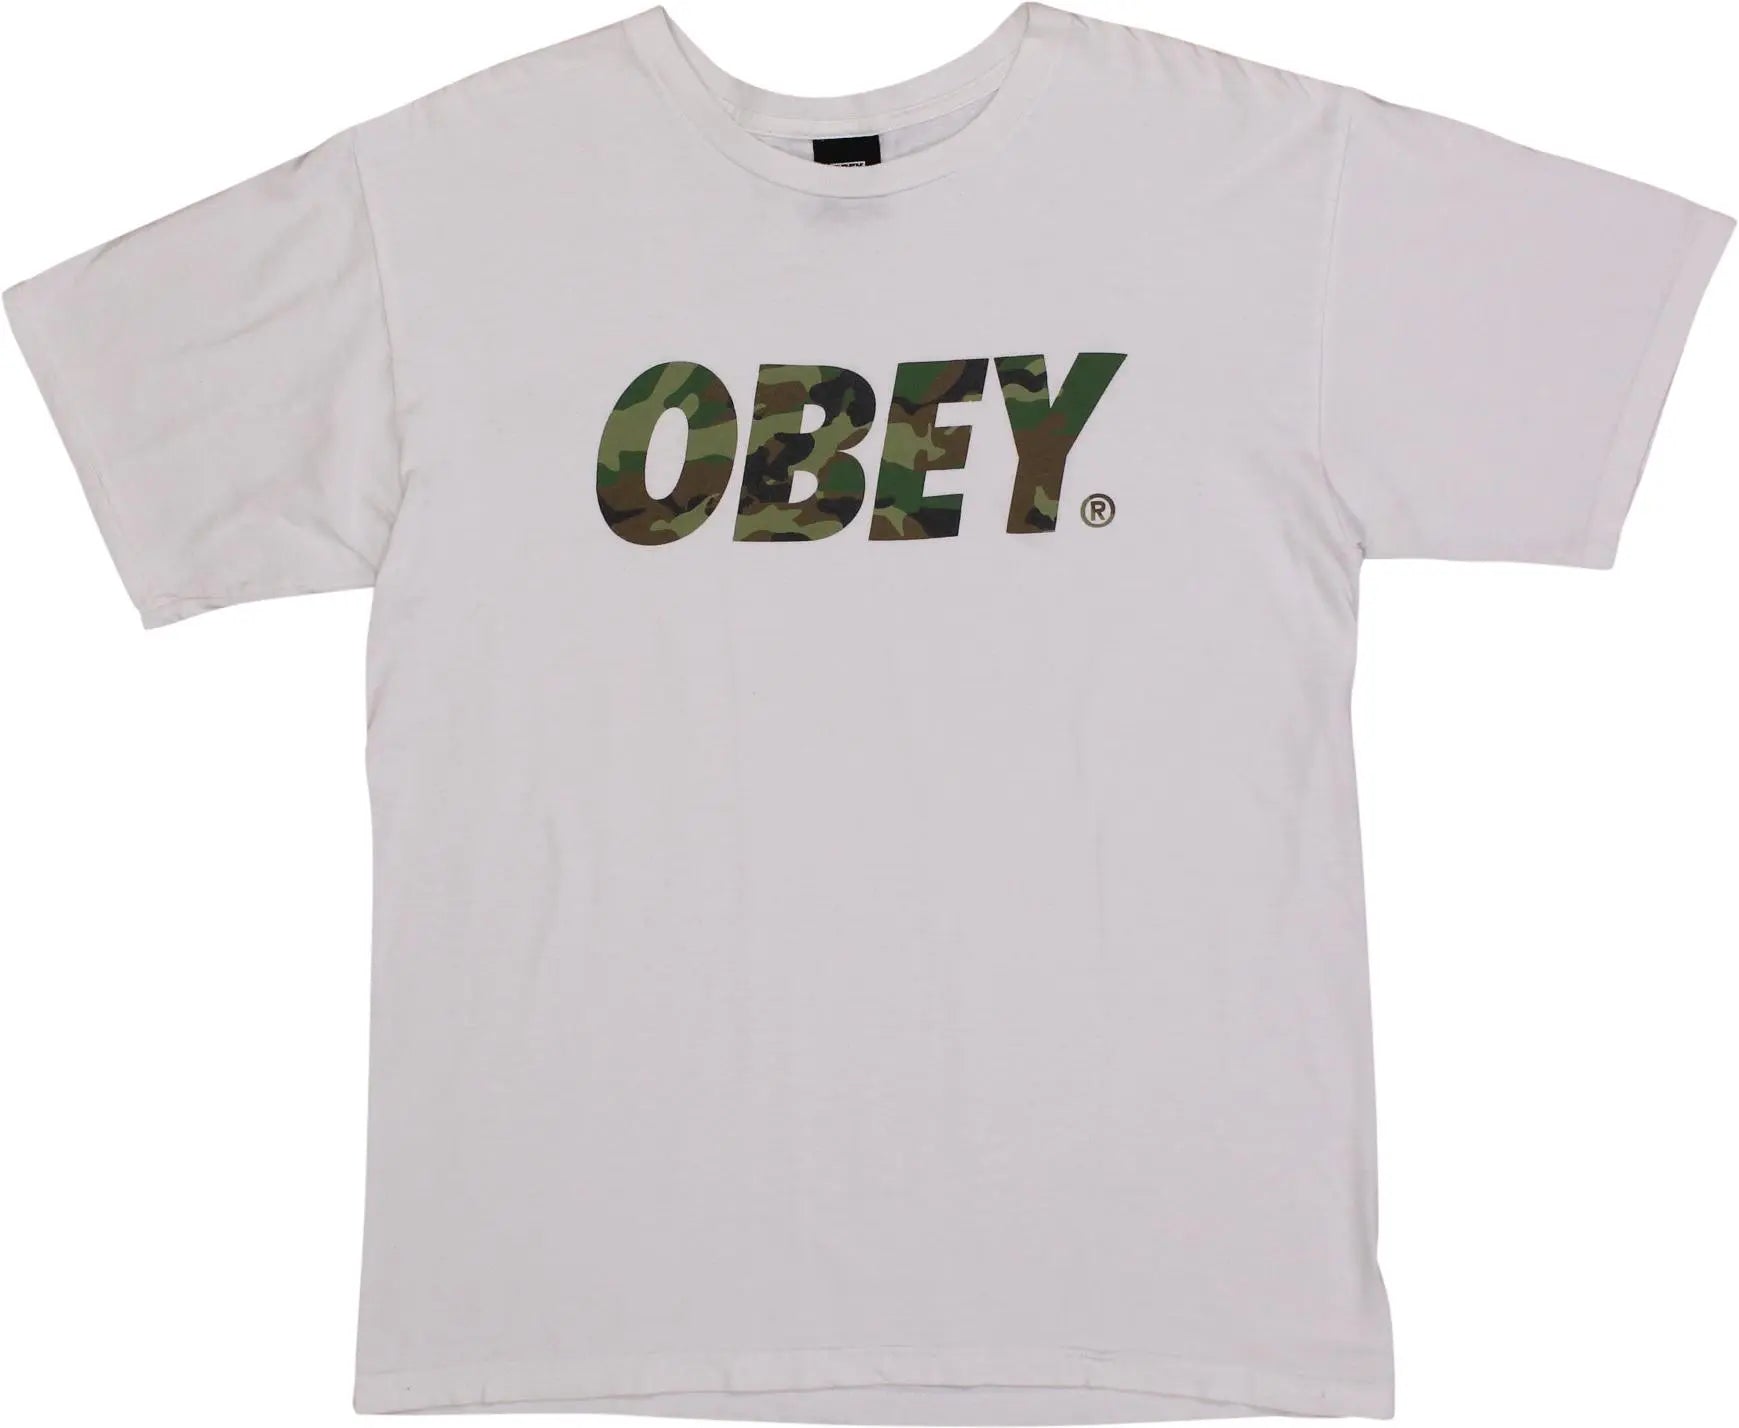 Obey - White Obey T-shirt- ThriftTale.com - Vintage and second handclothing